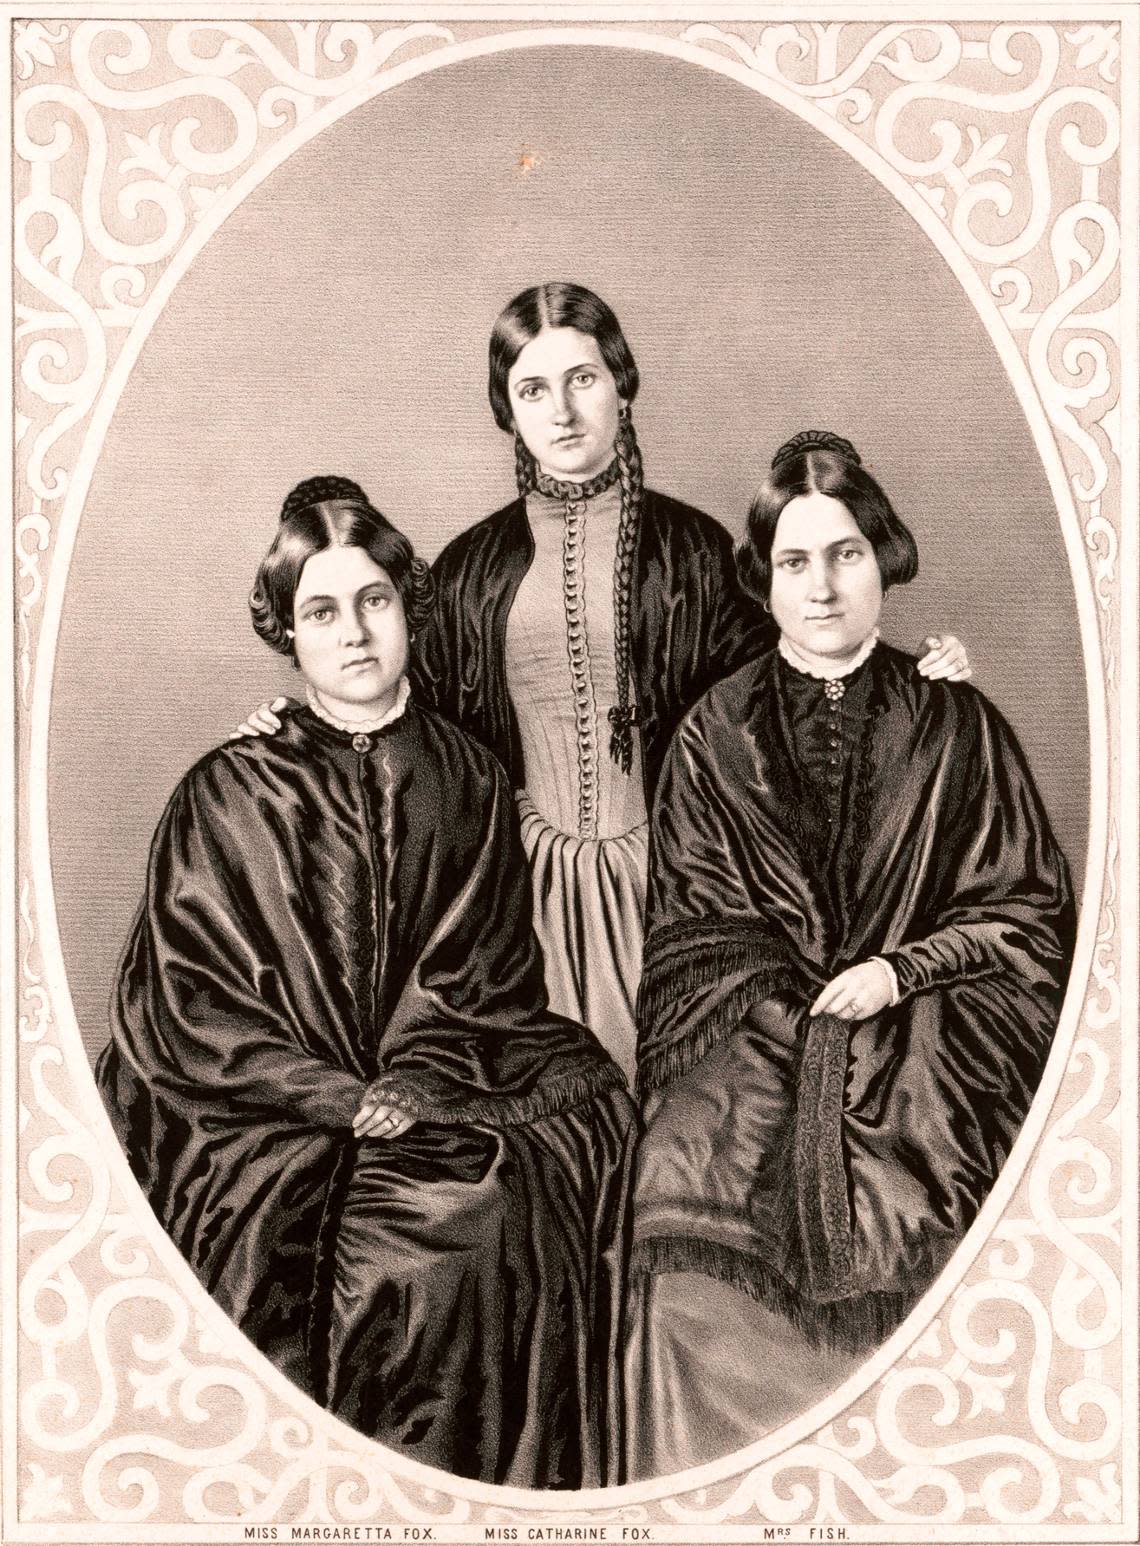 Maggie, Kate, and Leah Fox, founders of Spiritualism.